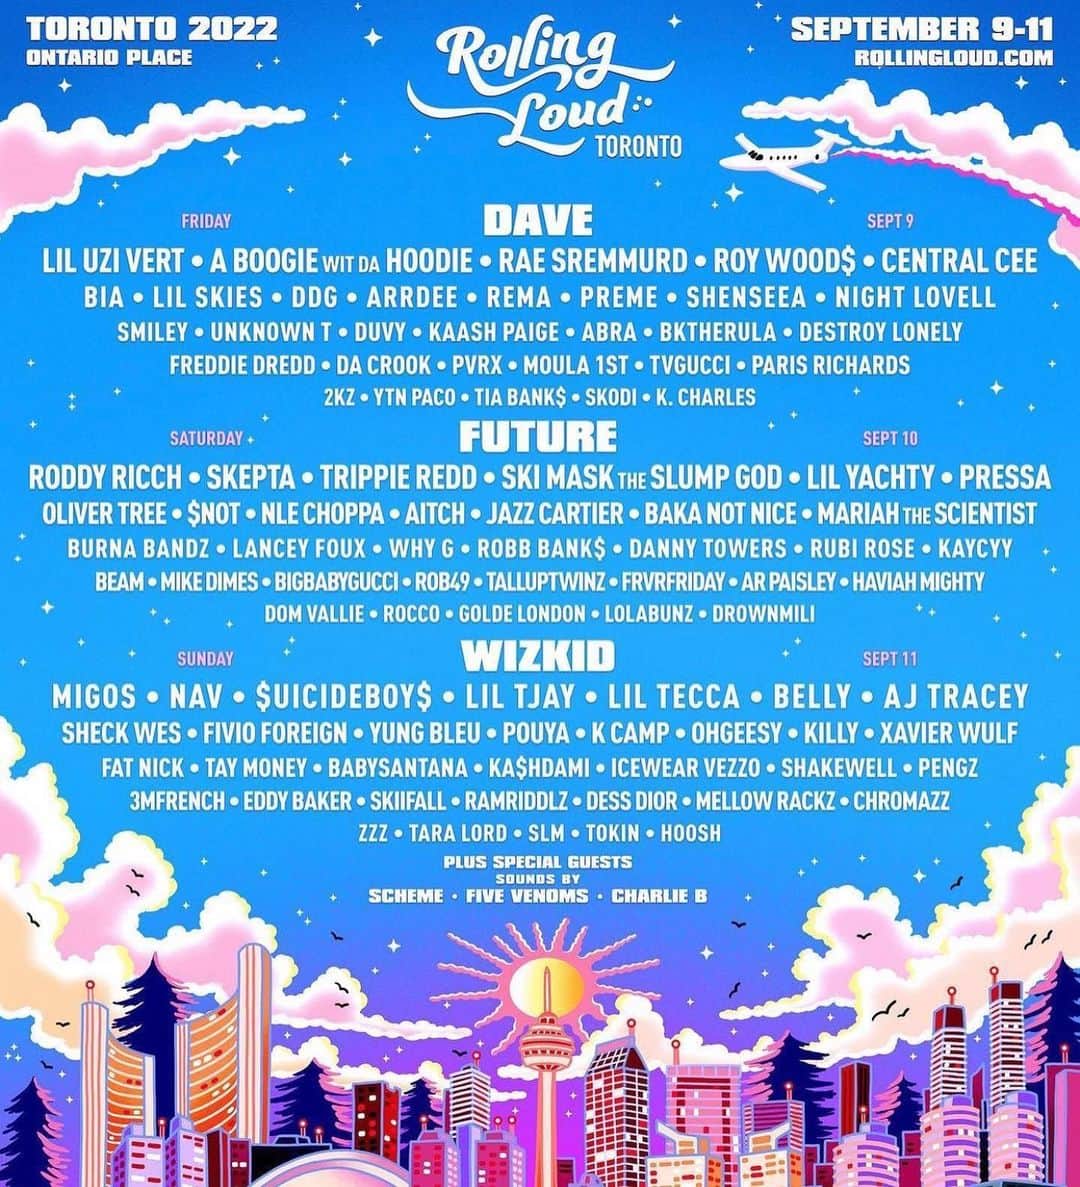 Migosのインスタグラム：「T O R O N T O • @rollingloud  9. 11. 22. 🇨🇦🔥   ON SALE FRI, 4/29 @ 12PM ET  PRESALE WEDS, 4/27 - THURS, 4/28 @americanexpress CARDMEMBERS ONLY  RollingLoud.com/toronto」